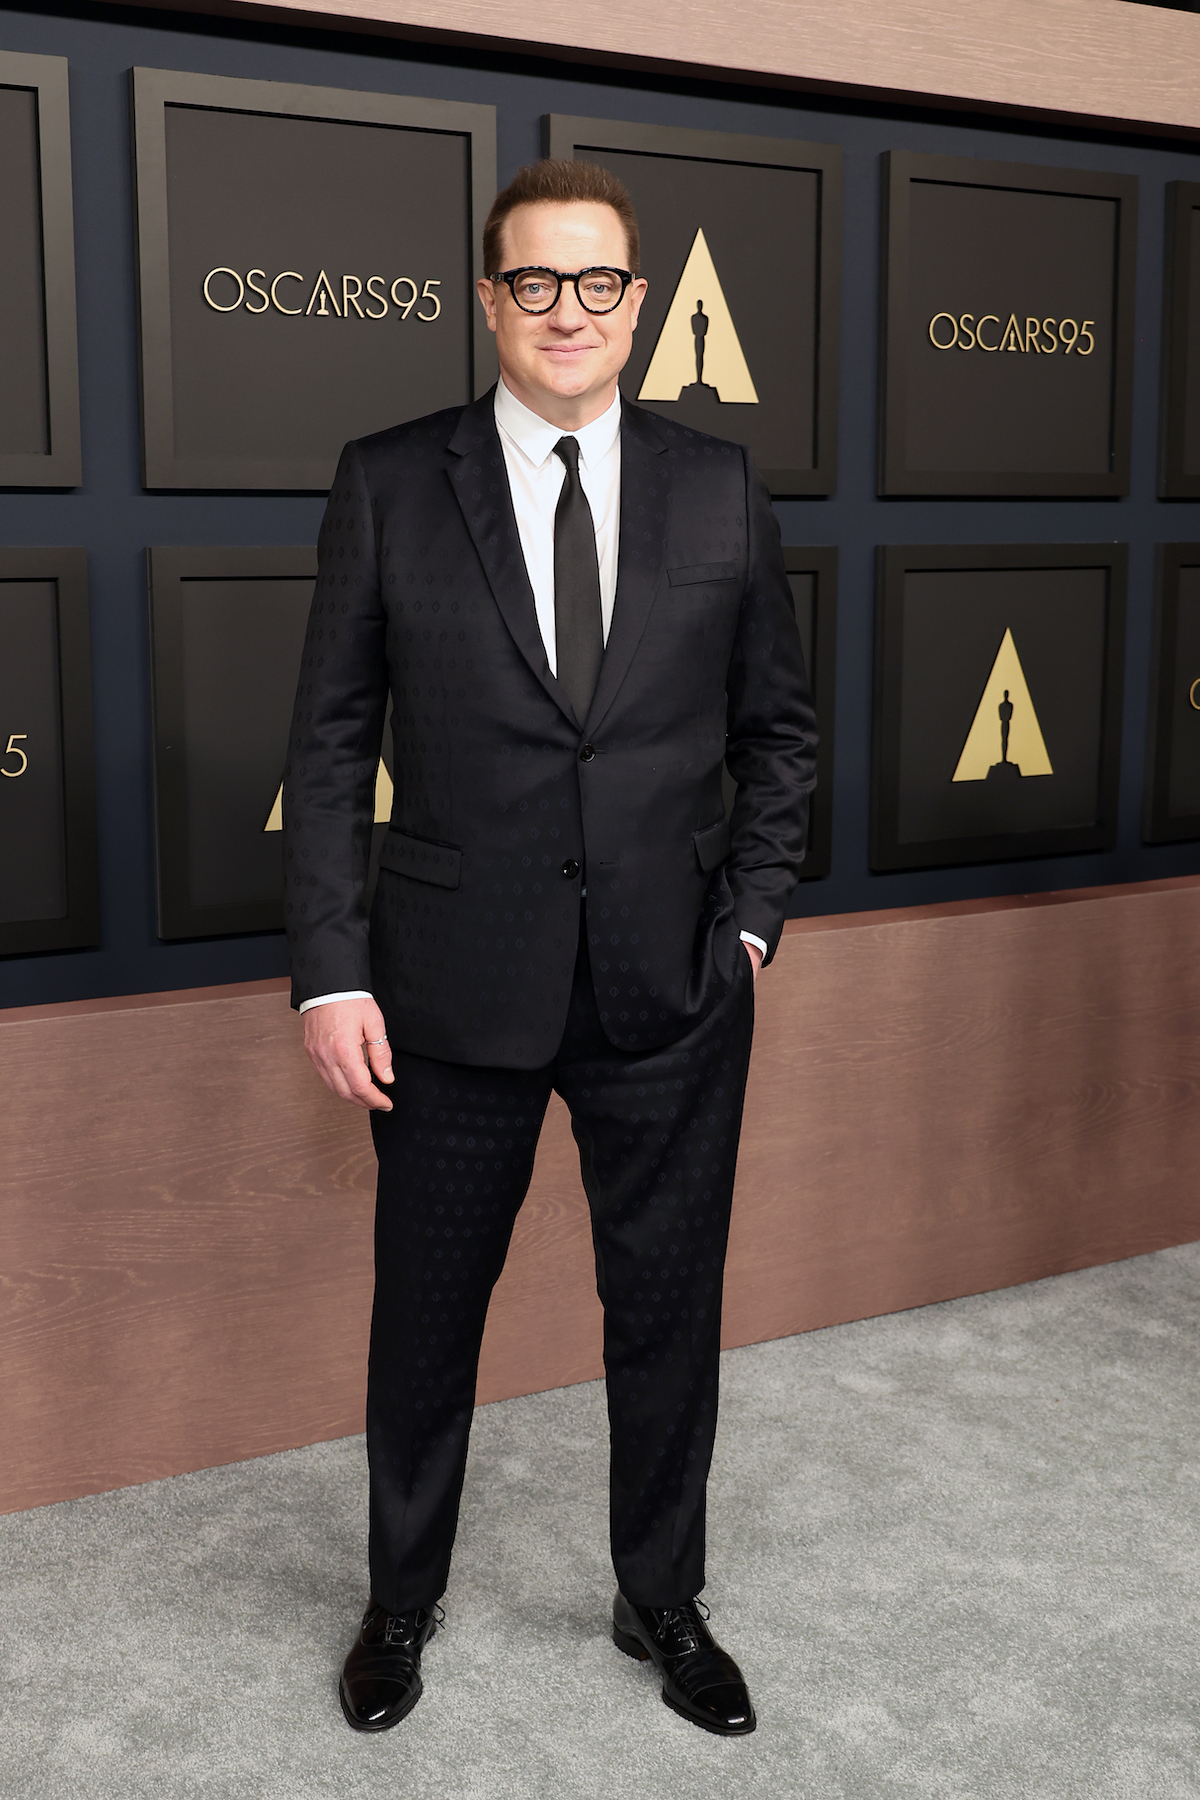 BEVERLY HILLS, CALIFORNIA - FEBRUARY 13: Brendan Fraser attends the 95th Annual Oscars Nominees Luncheon at The Beverly Hilton on February 13, 2023 in Beverly Hills, California. (Photo by Monica Schipper/WireImage,)